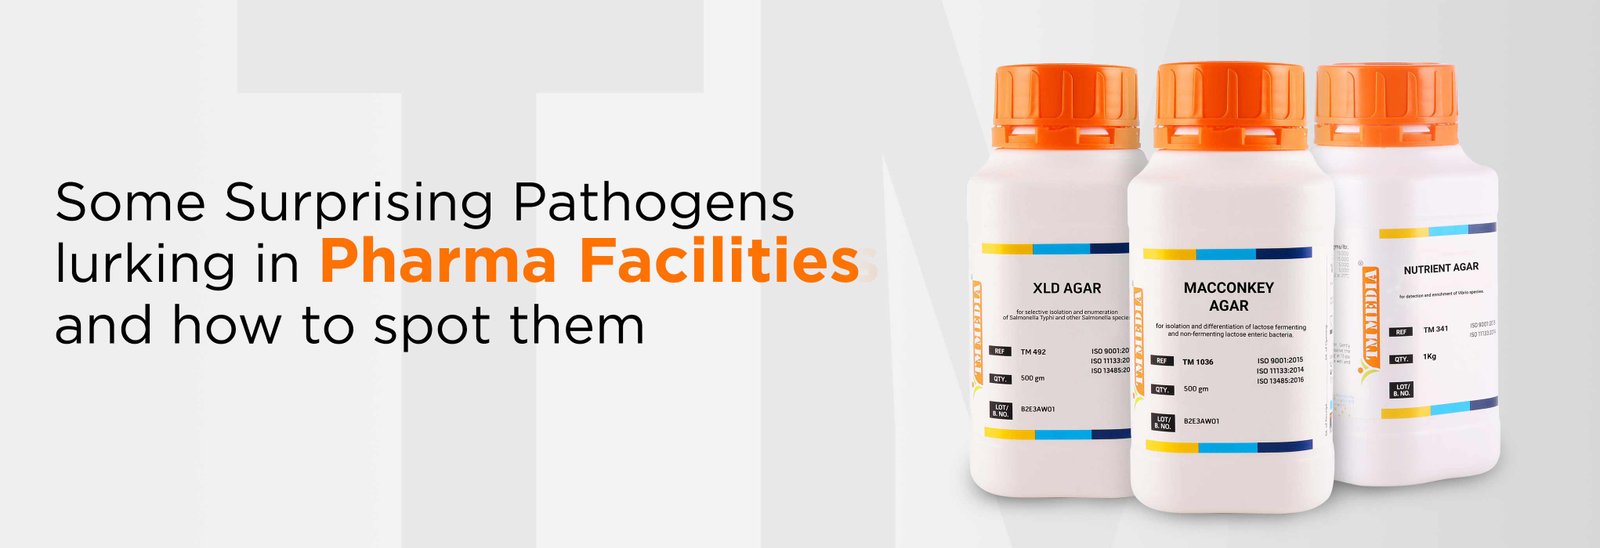 Some Surprising Pathogens Lurking in Pharma Facilities and How to Spot Them